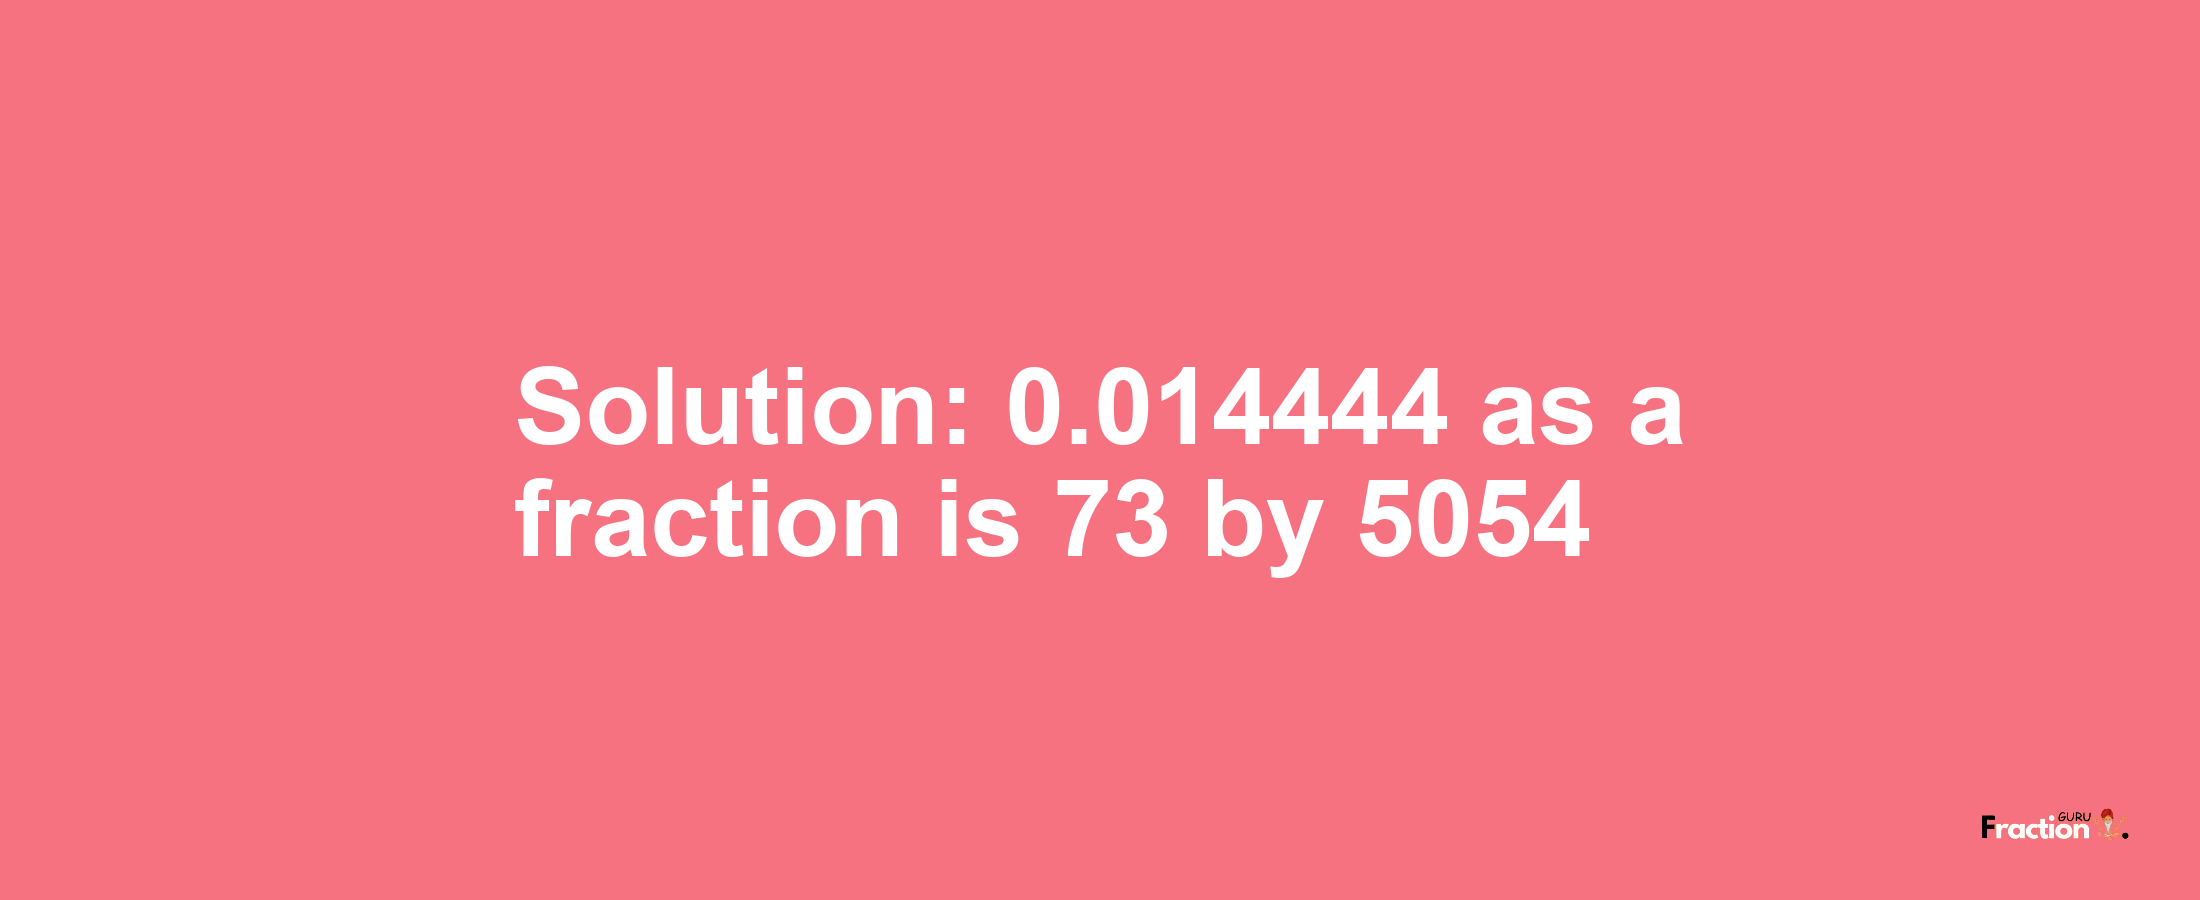 Solution:0.014444 as a fraction is 73/5054